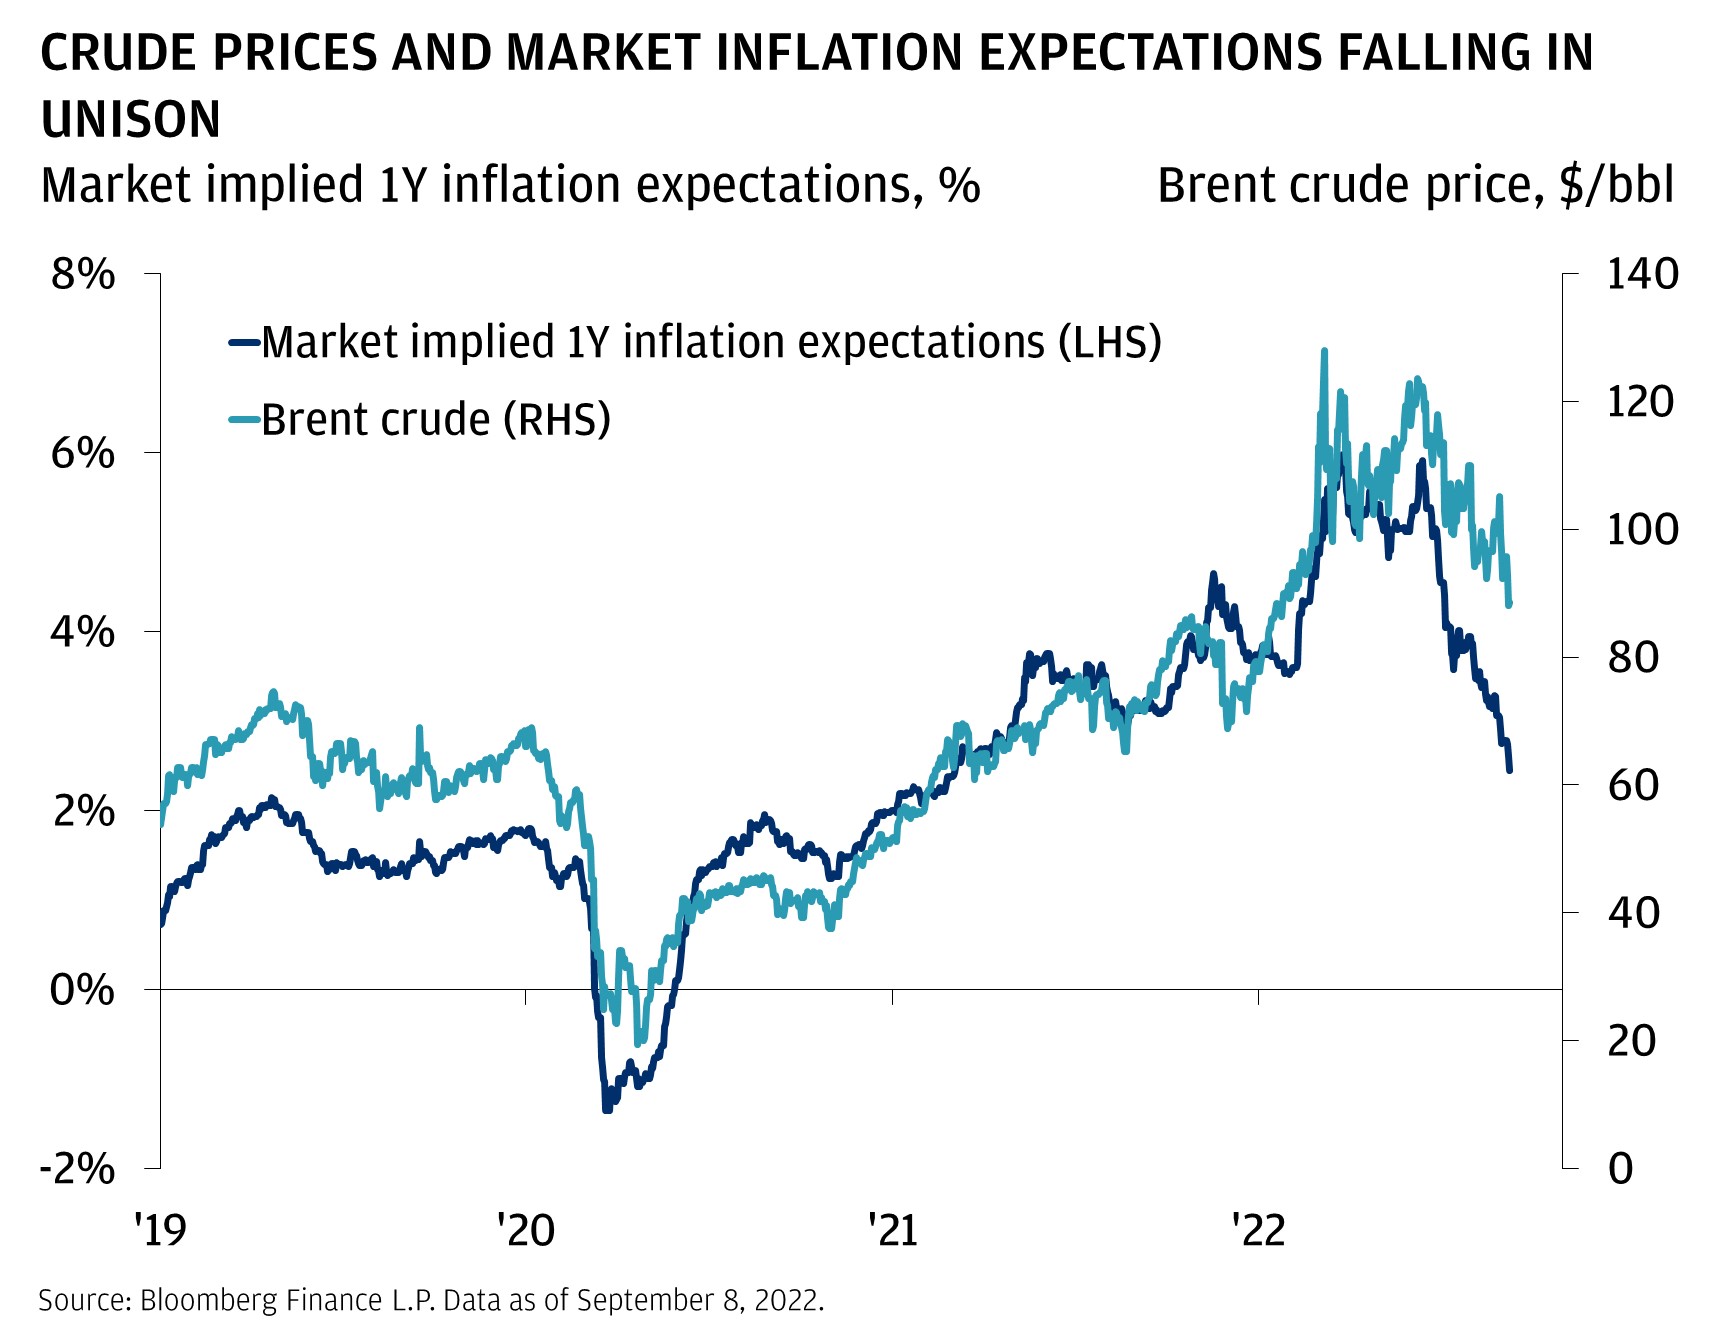 This chart shows market implied 1-year inflation expectations overlayed by brent crude prices from 2019 to 2022.